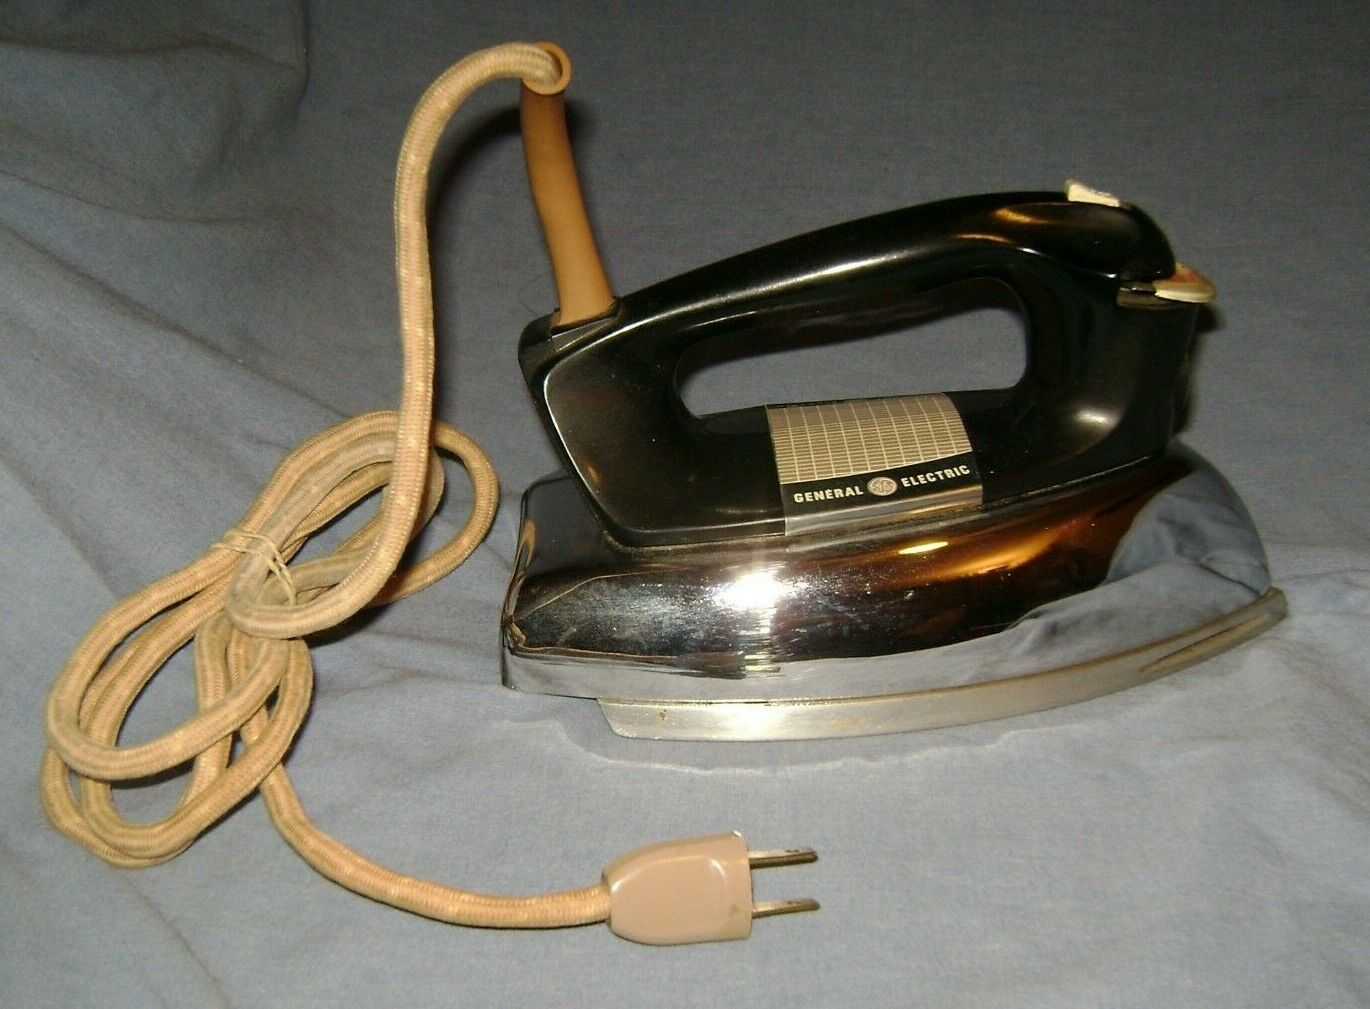 Vintage General Electric Steam Iron Clothes H1F60 in full working order